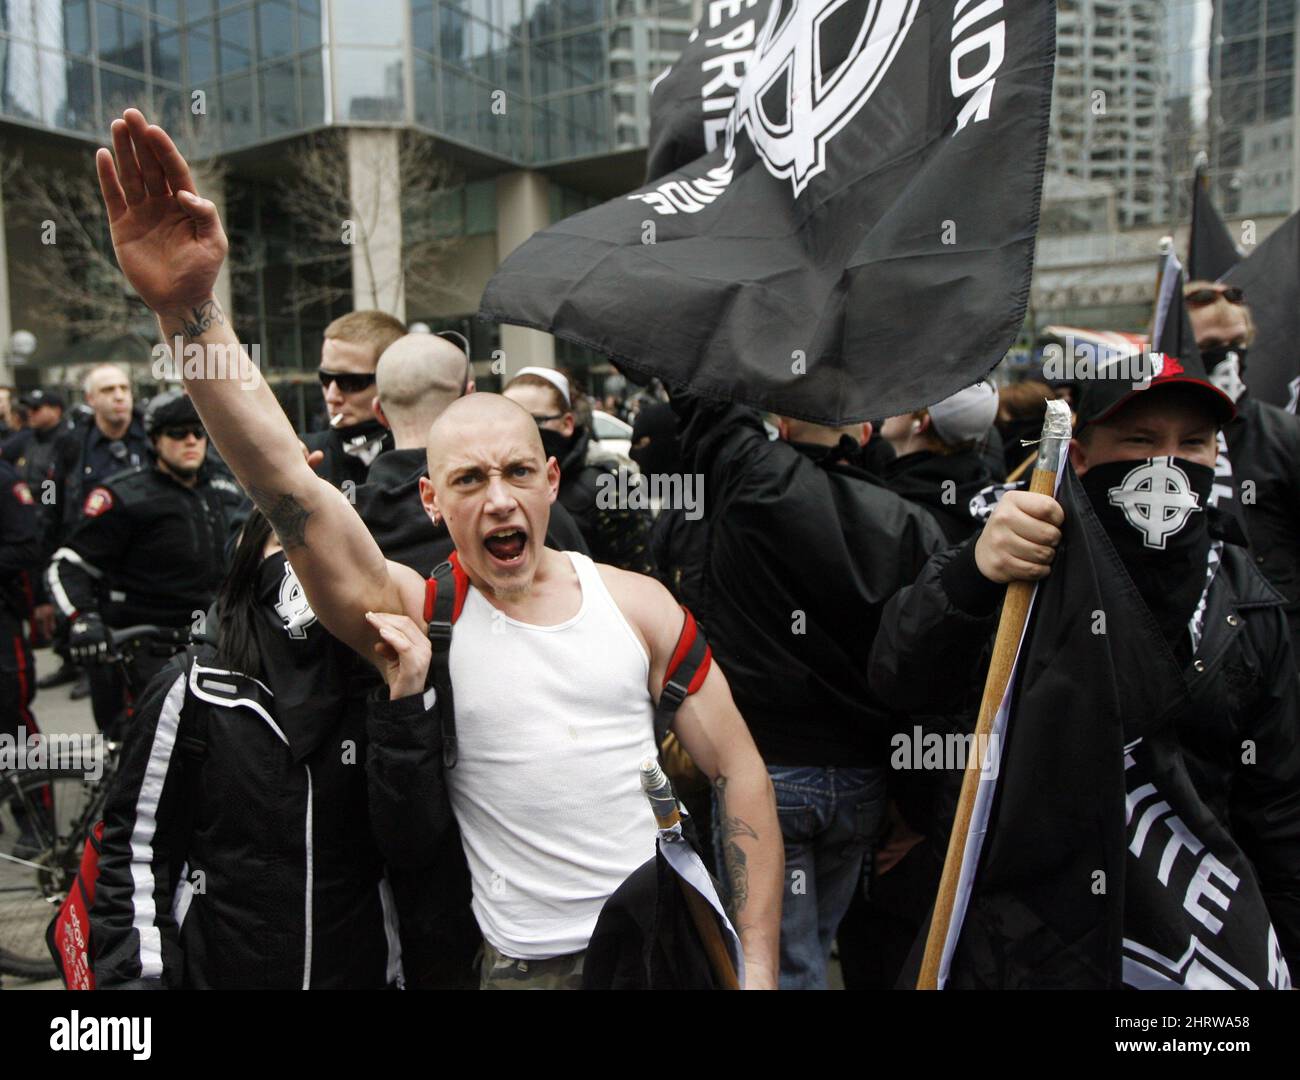 An Aryan Guard supporter salutes at White Pride rally as he yells at anti-racsim supporters in Calgary, Alberta, Canada on Saturday, March 21, 2009. Over 500 people turned out to protest the march and clashed with Aryan Guard supporters. Police detained several people during the event. (AP Photo/The Canadian Press, Jeff McIntosh) Stock Photo